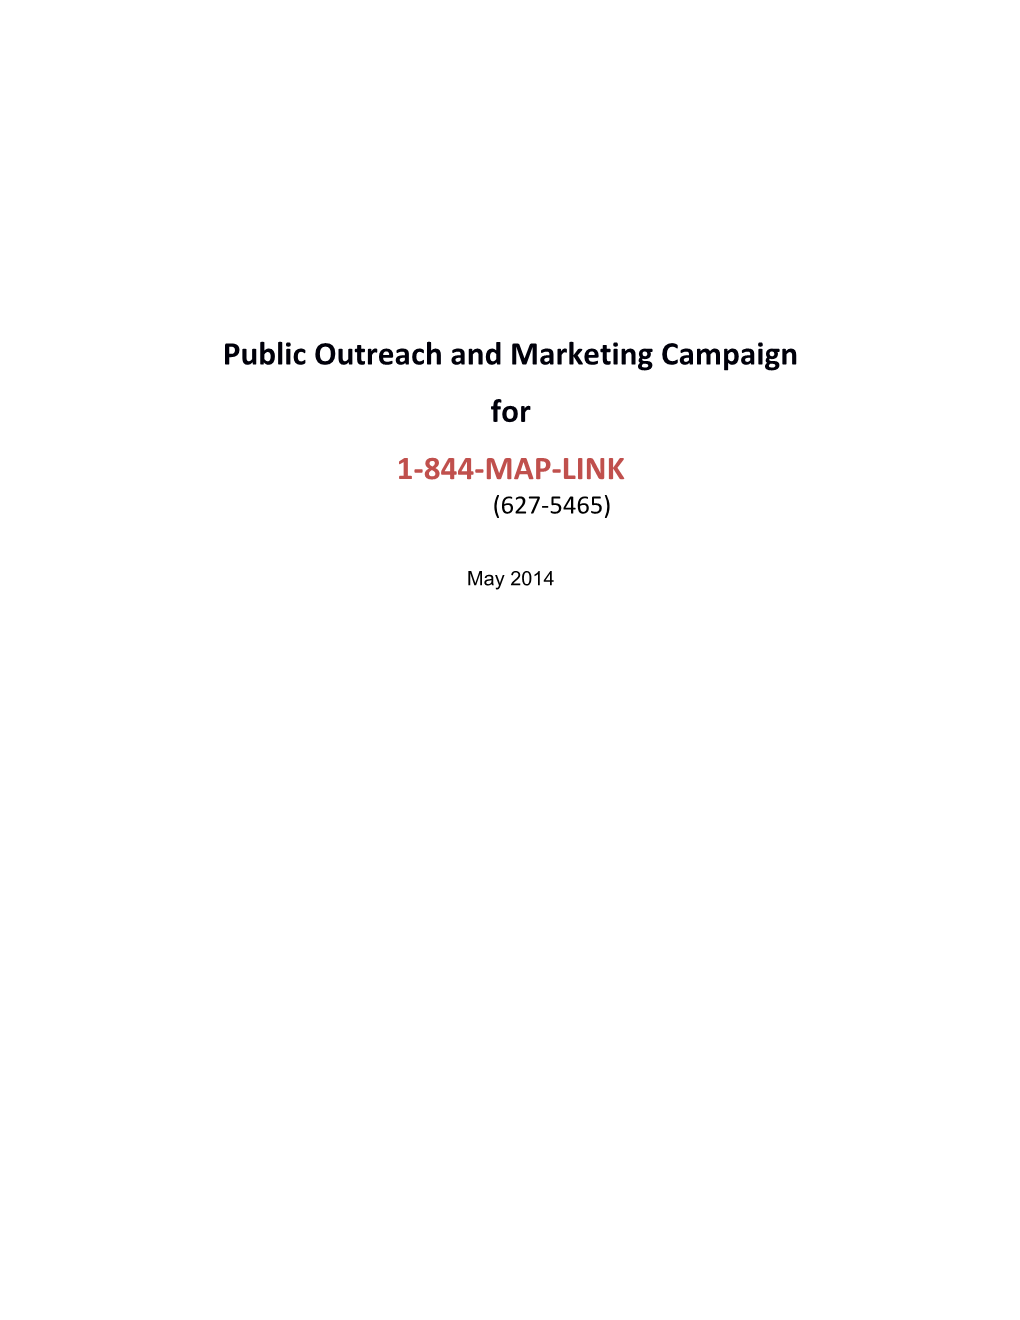 Public Outreach and Marketing Campaign for 1-844-MAP-LINK (627-5465)